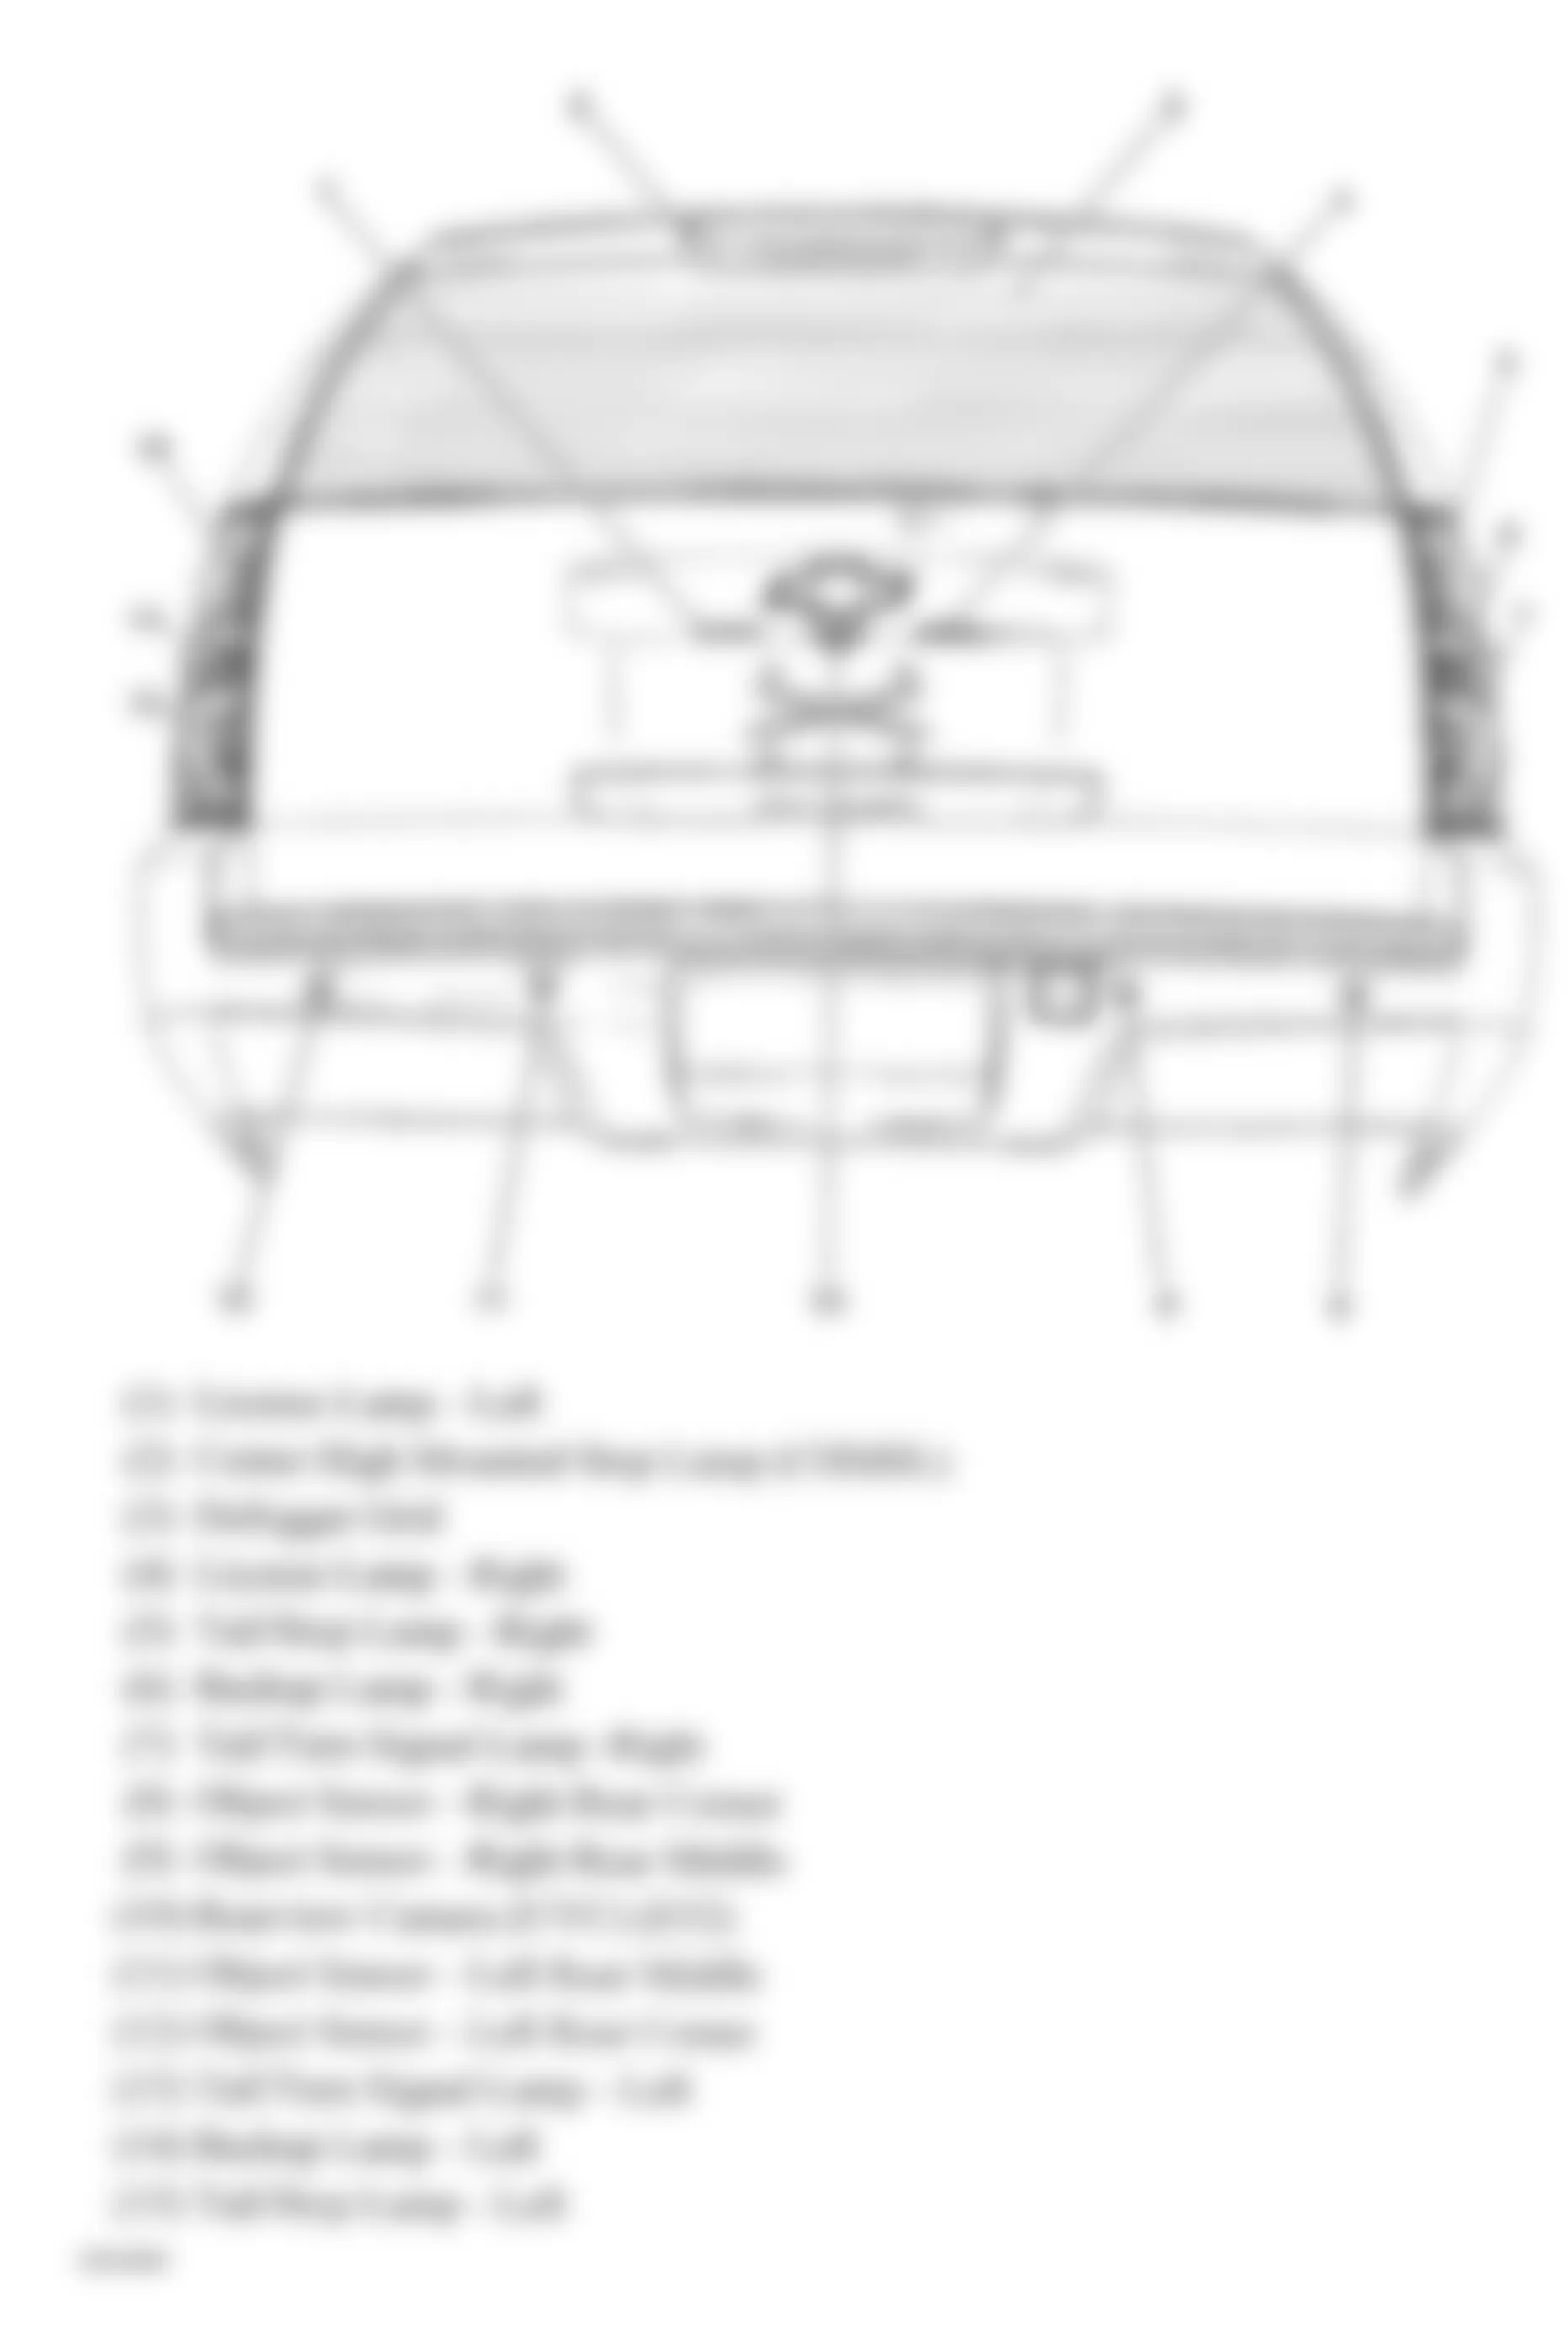 Chevrolet Tahoe 2010 - Component Locations -  Rear Of Vehicle (Avalanche, Suburban & Tahoe W/One Piece Liftgate)